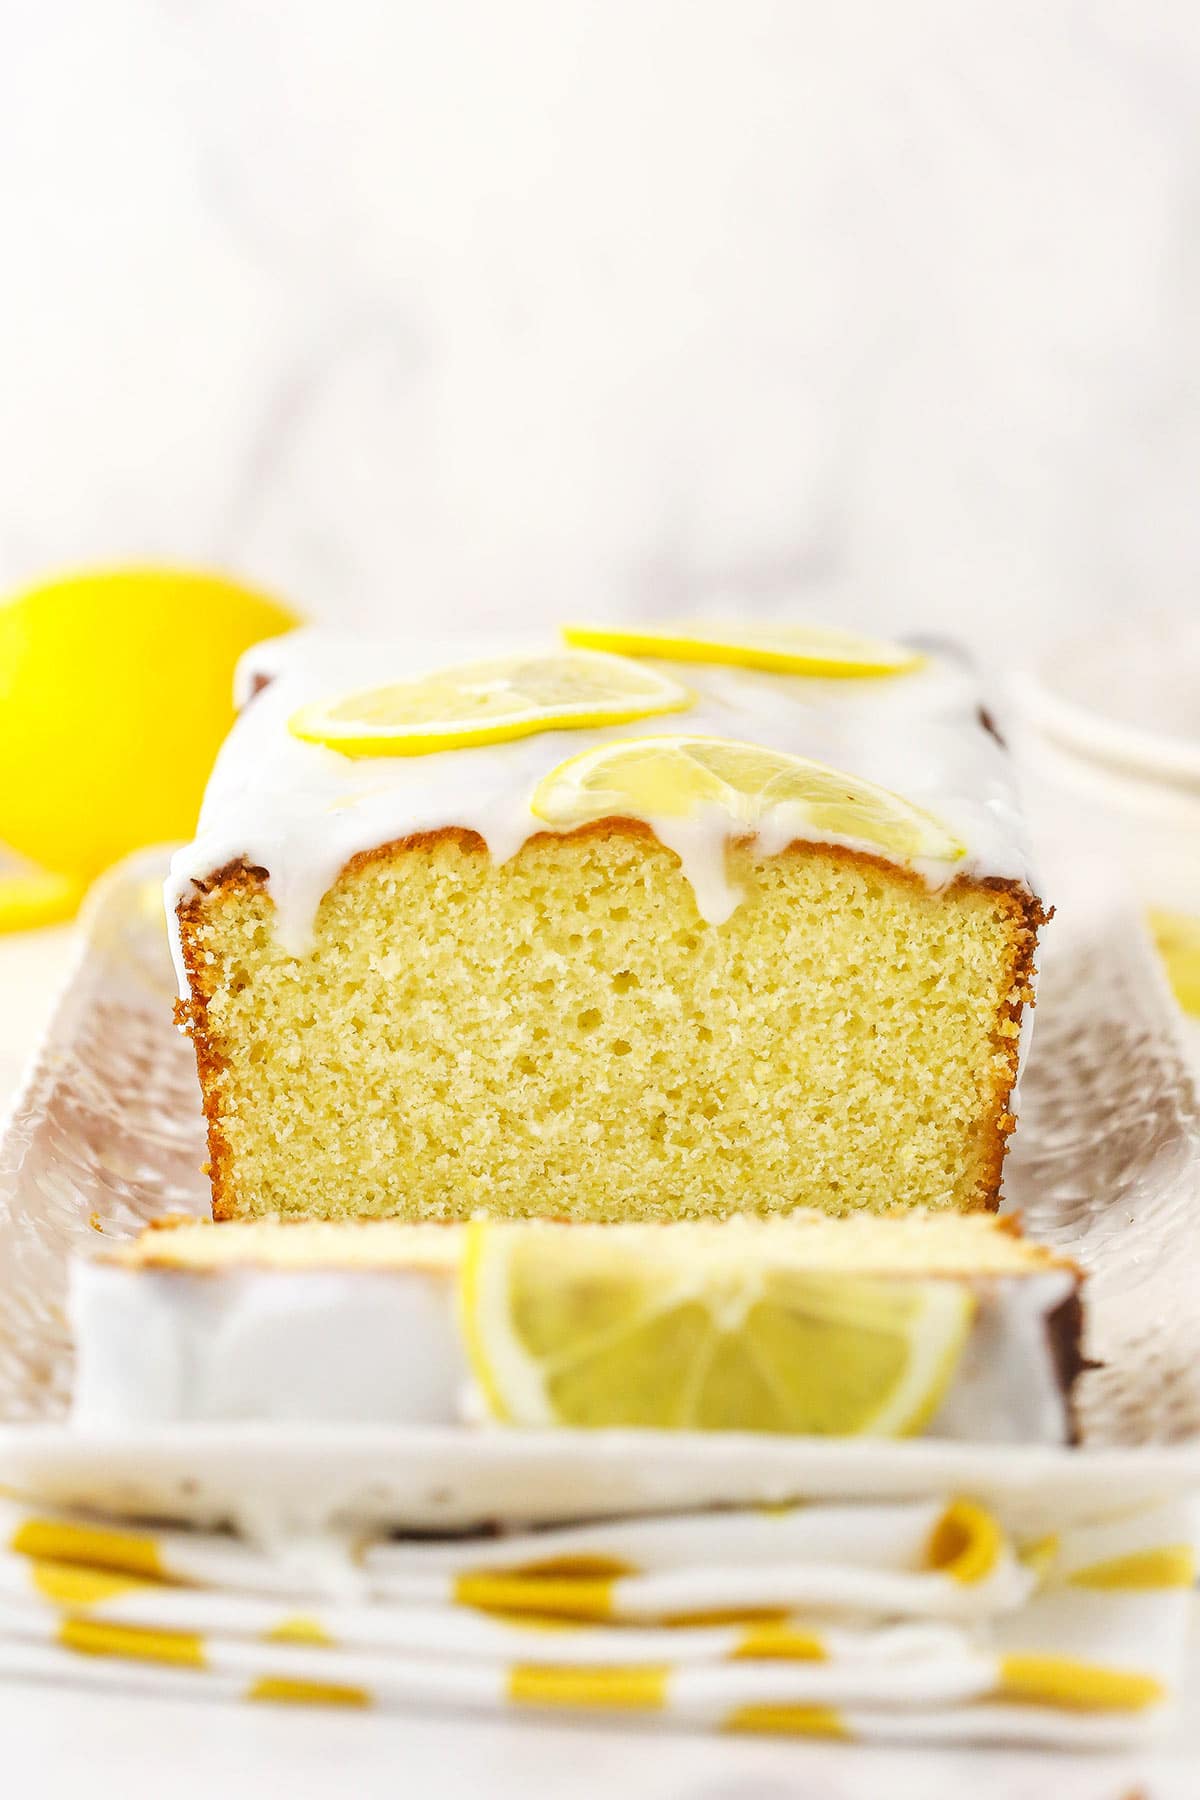 A lemon loaf on a long platter with a white and yellow kitchen towel underneath it